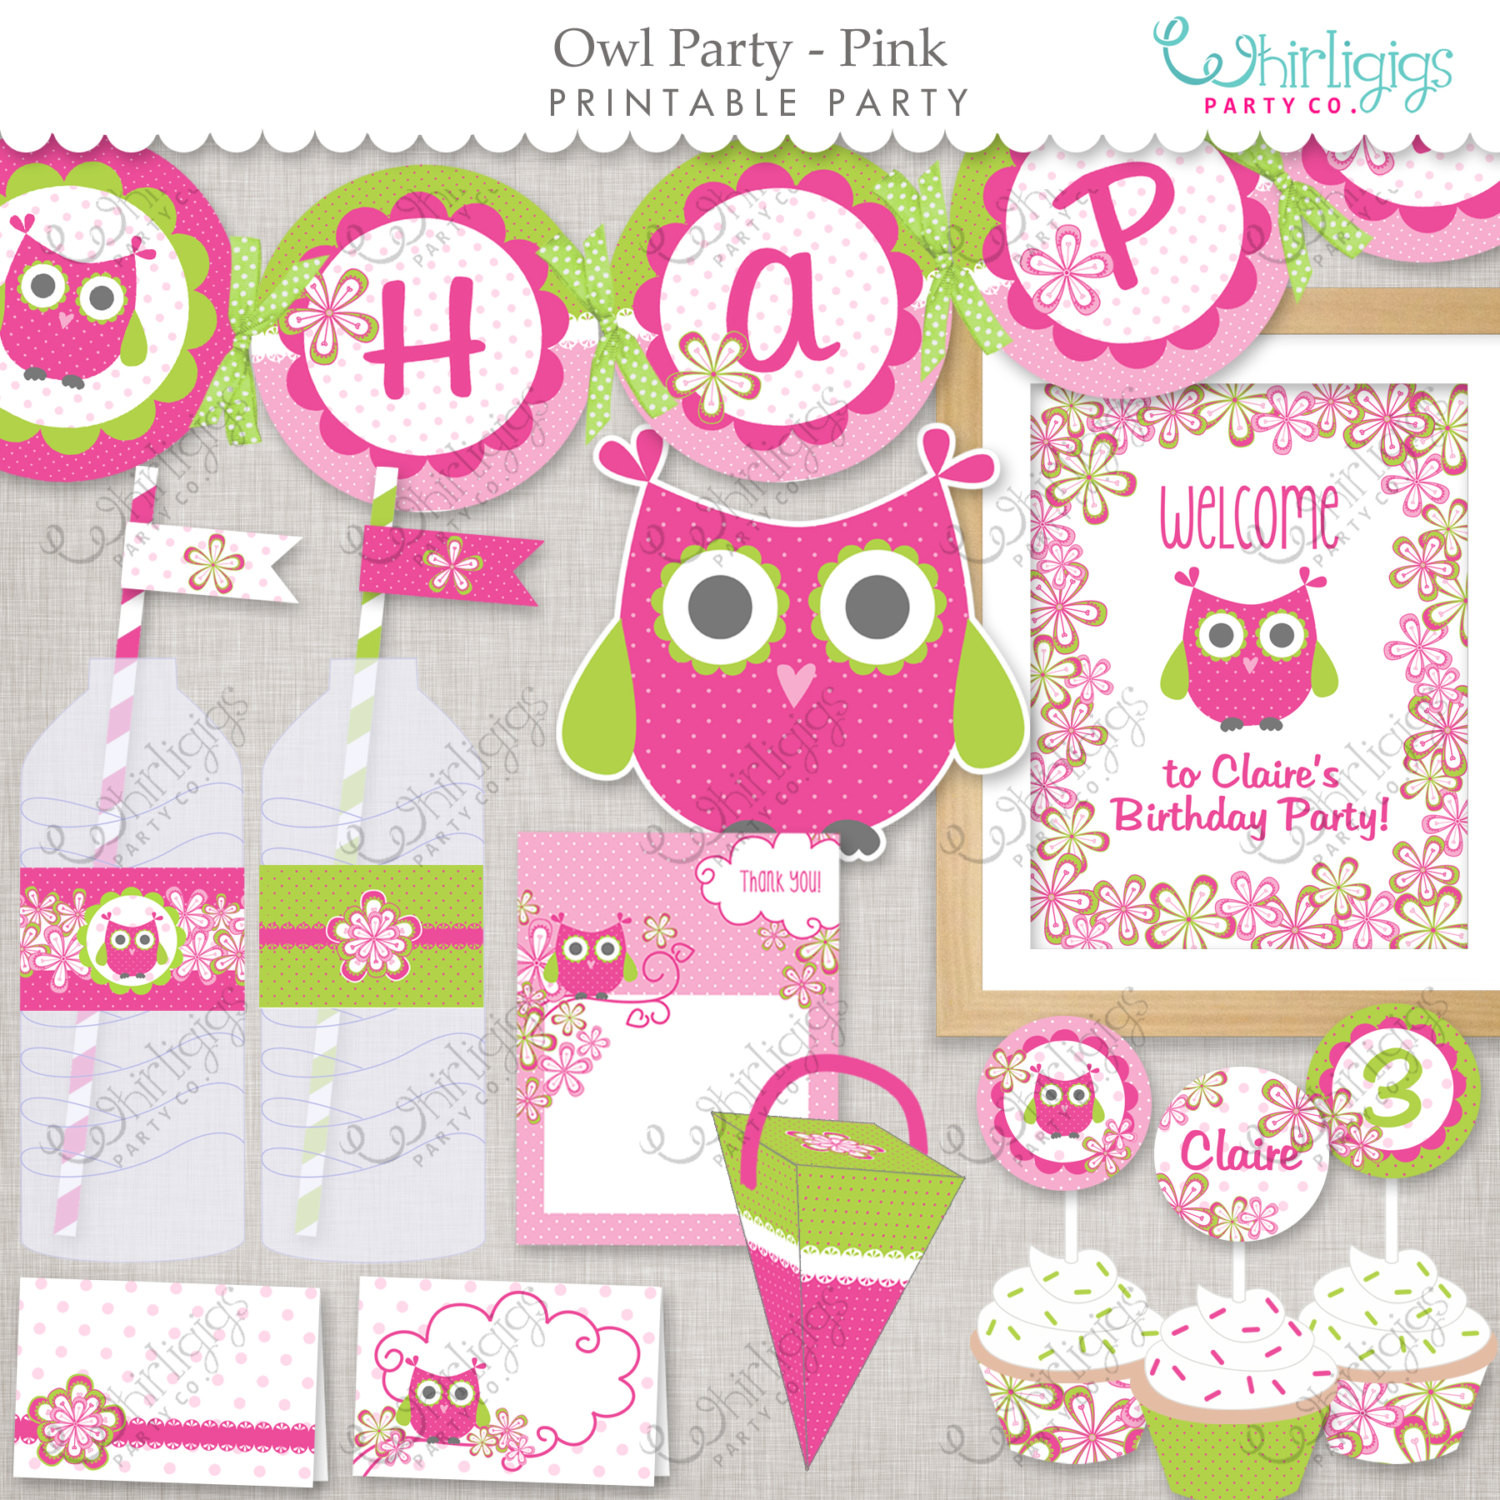 Best ideas about Owl Birthday Party Decorations
. Save or Pin Owl Party Pink Printable Party Supplies by whirligigspartyco Now.